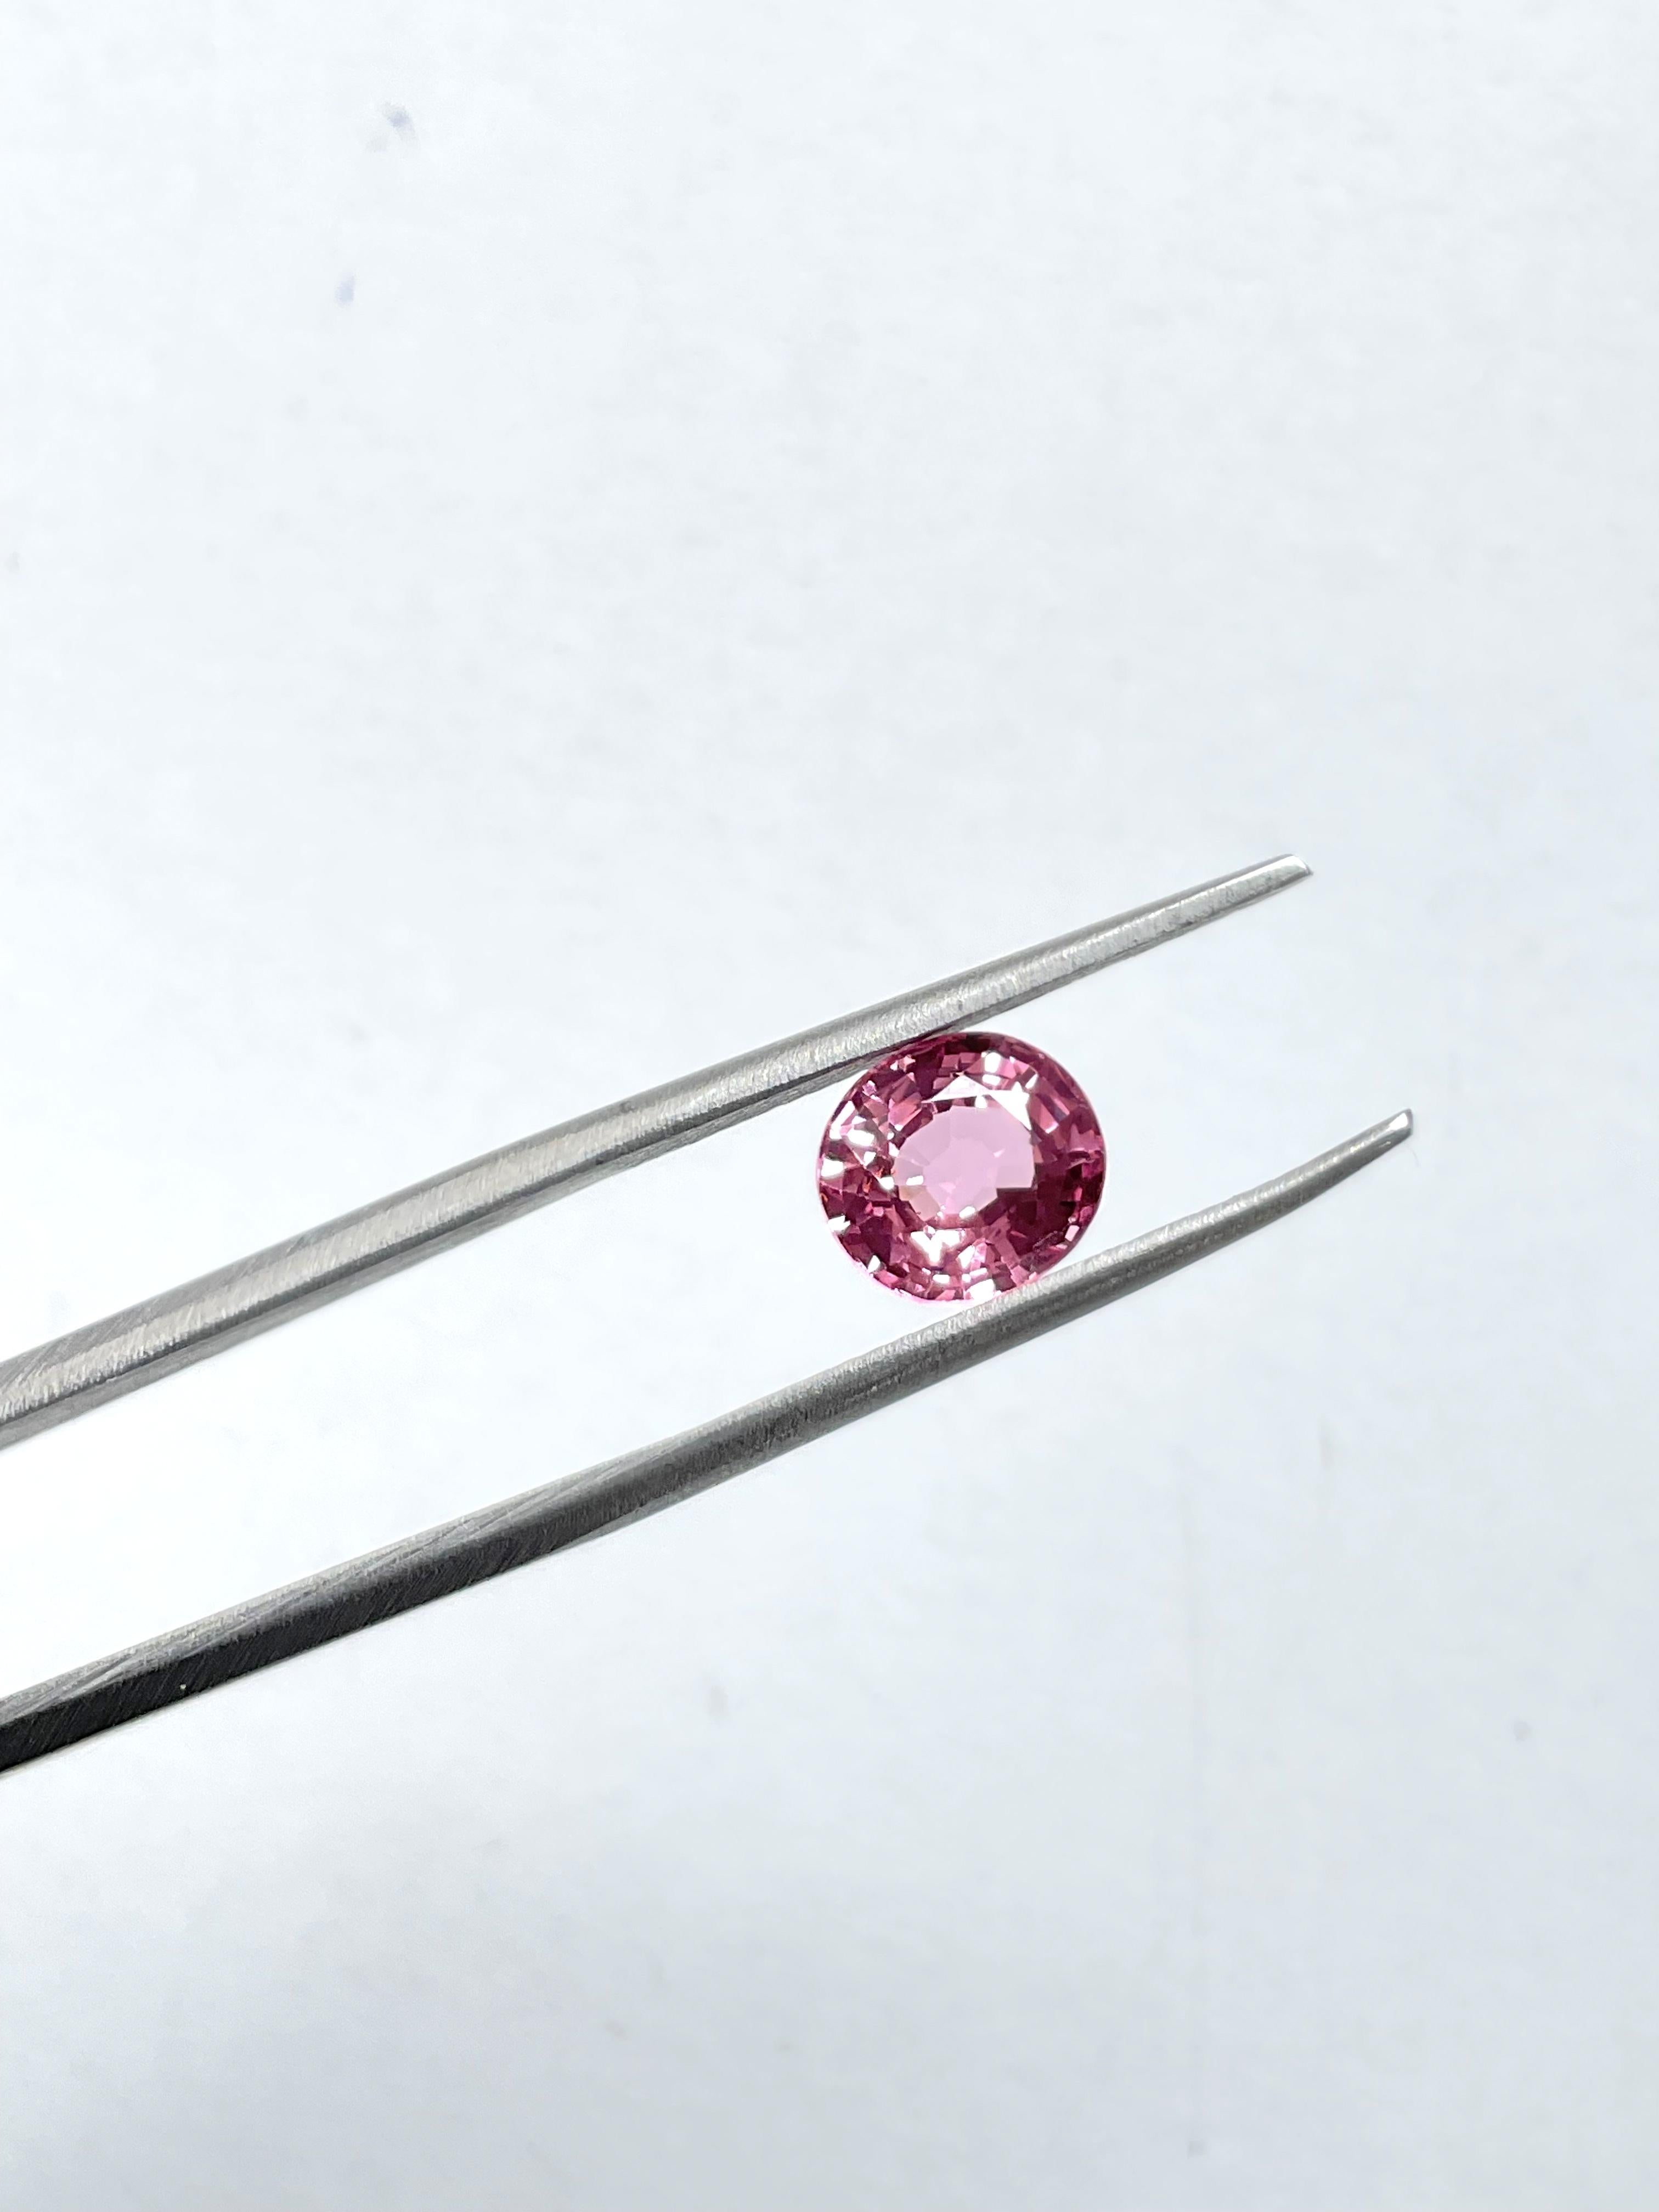 1.86 Carats pinkish burmese spinel cut stone oval natural gemstone top quality   For Sale 1